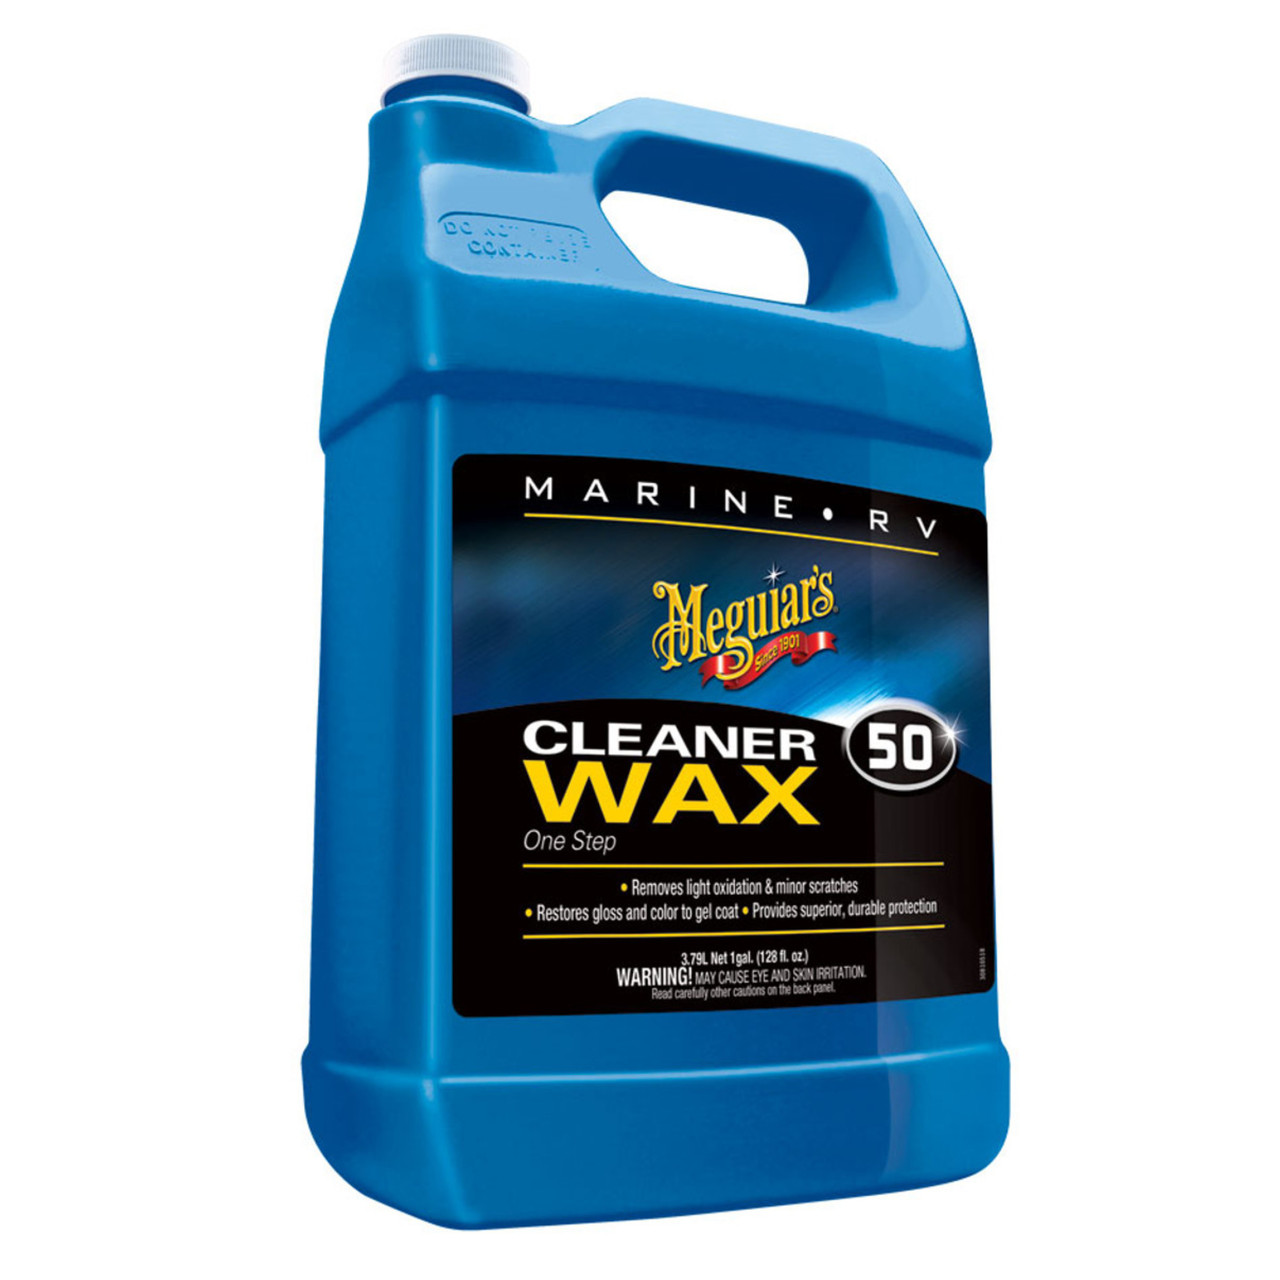 Meguiars New One Step Cleaner Wax Gallon, 290-M5001